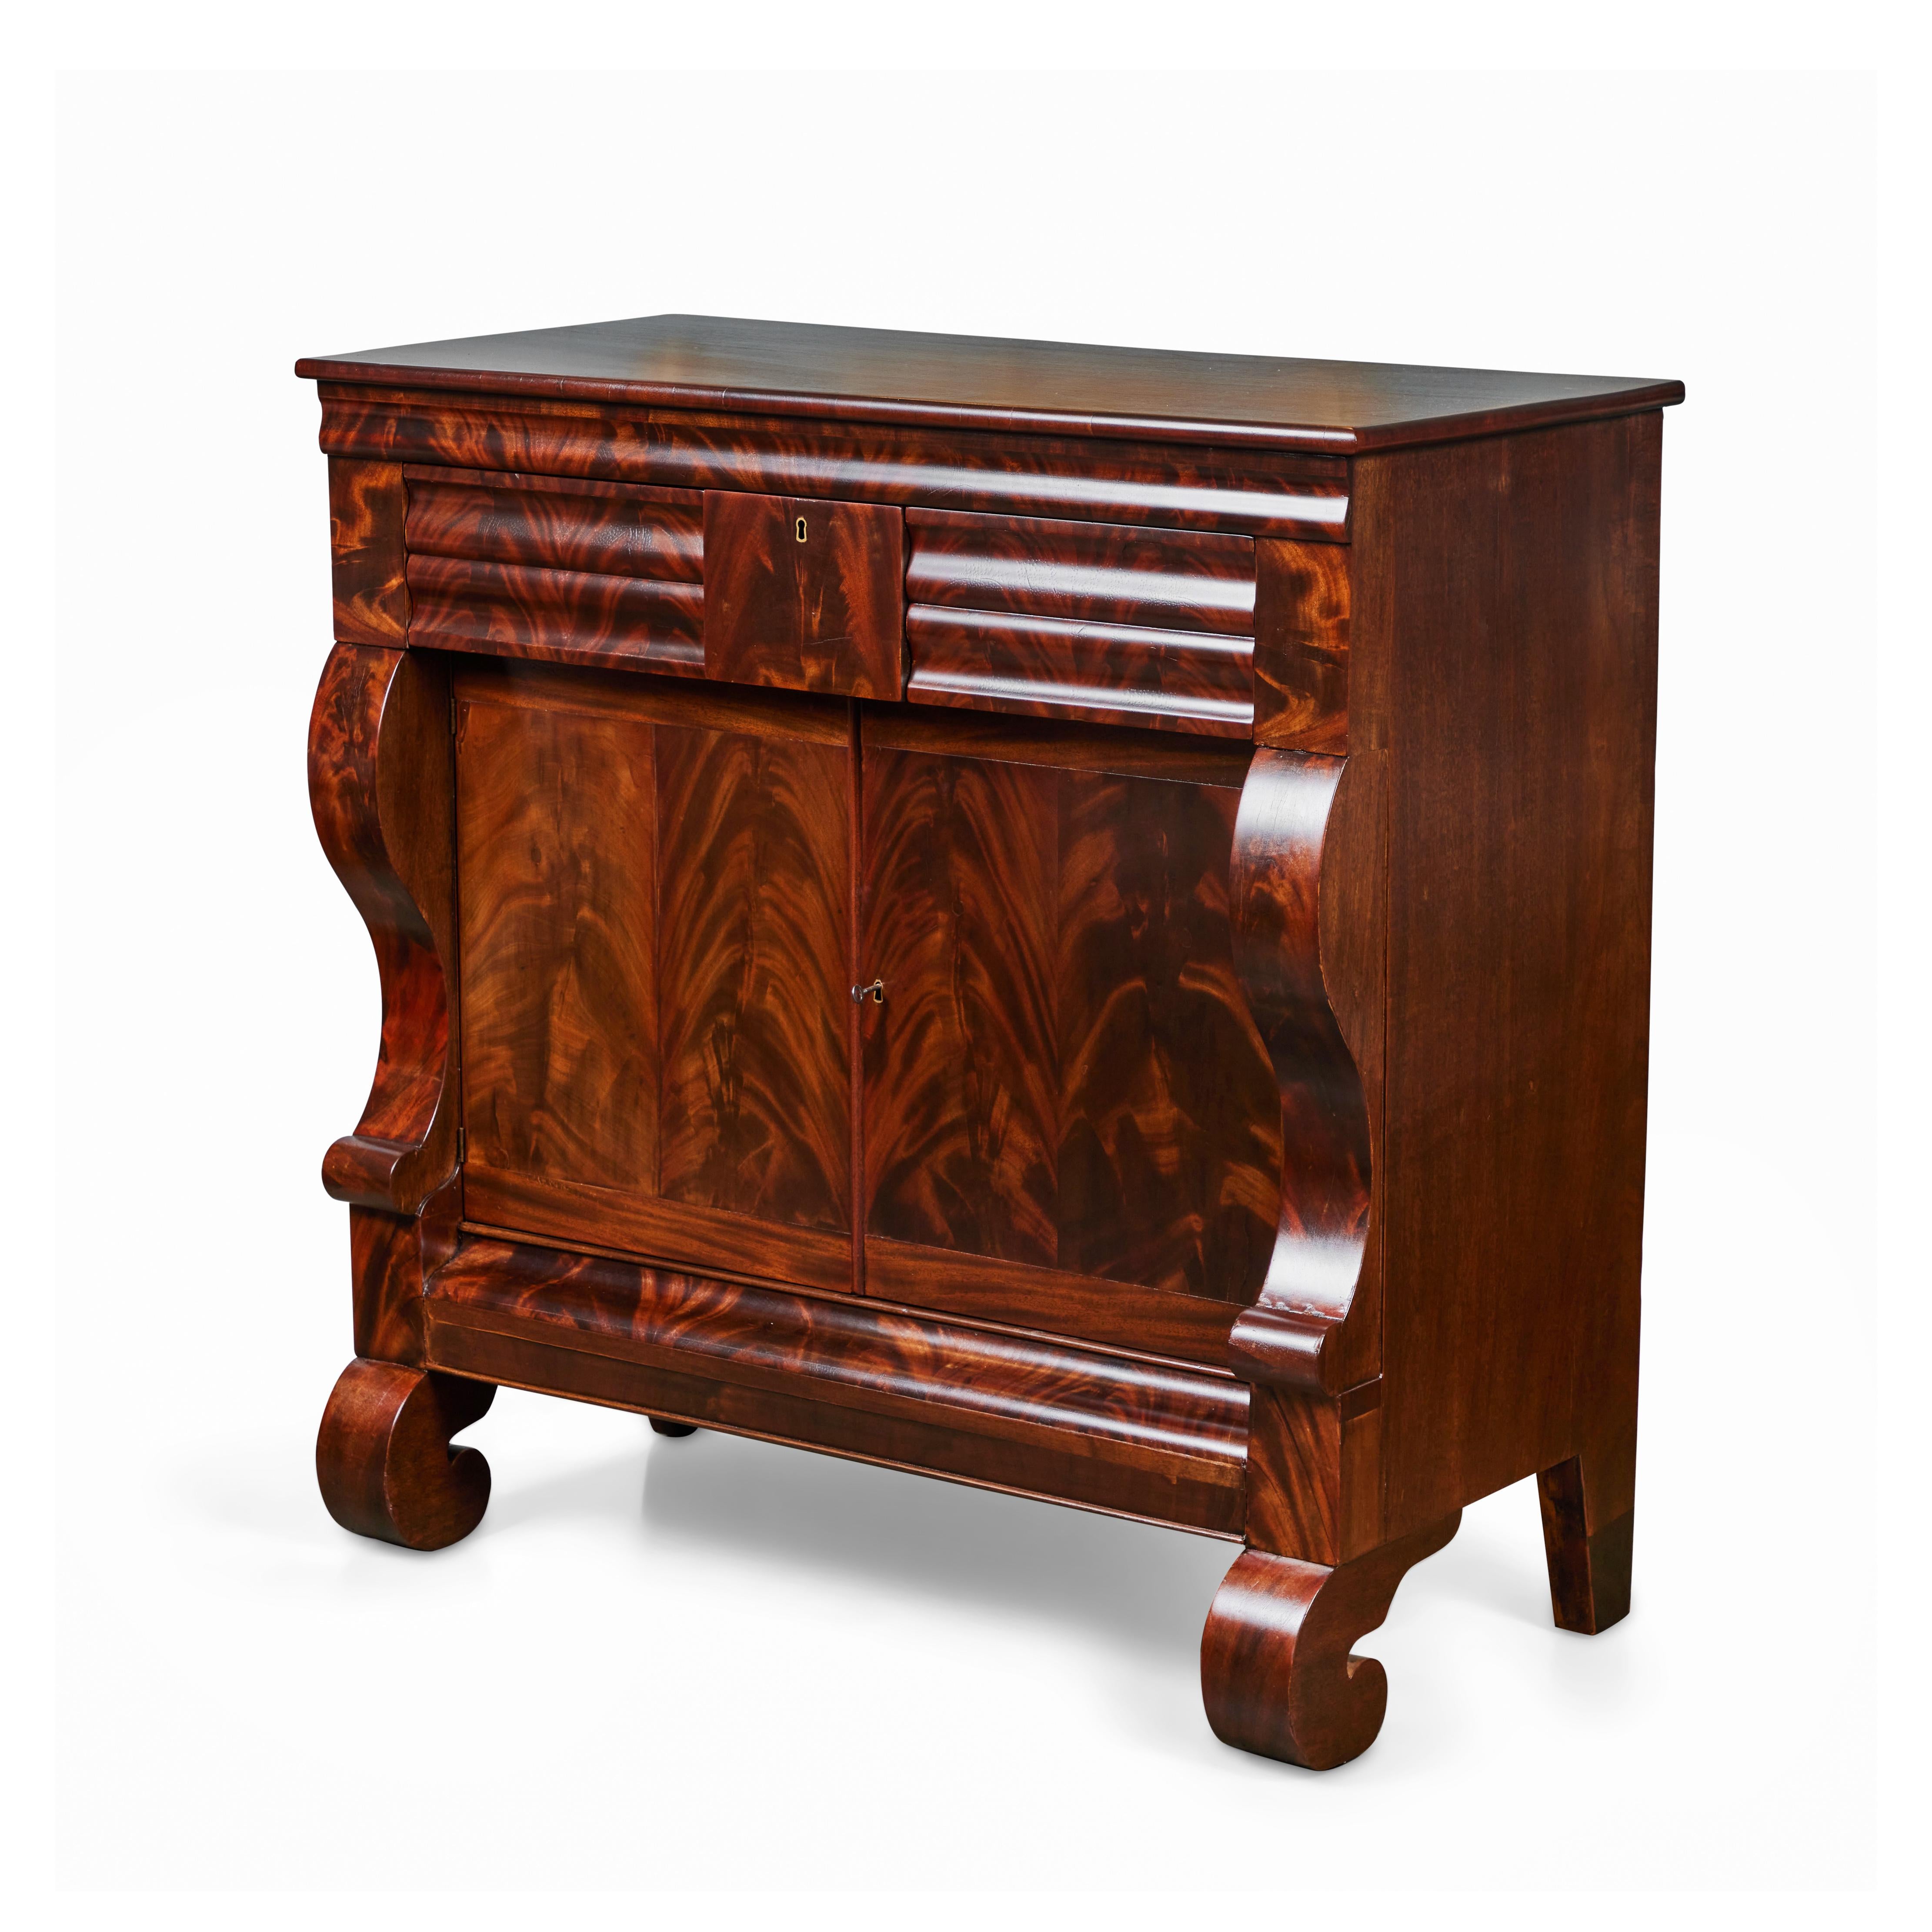 This stately ​antique 19th Century American Empire Flame​ ​Mahogany cabinet has 3 drawers​ and a two hinged door large cabinet for ample storage​. The middle drawer has a lock but there is no key. The doors are made from exceptional book-matched